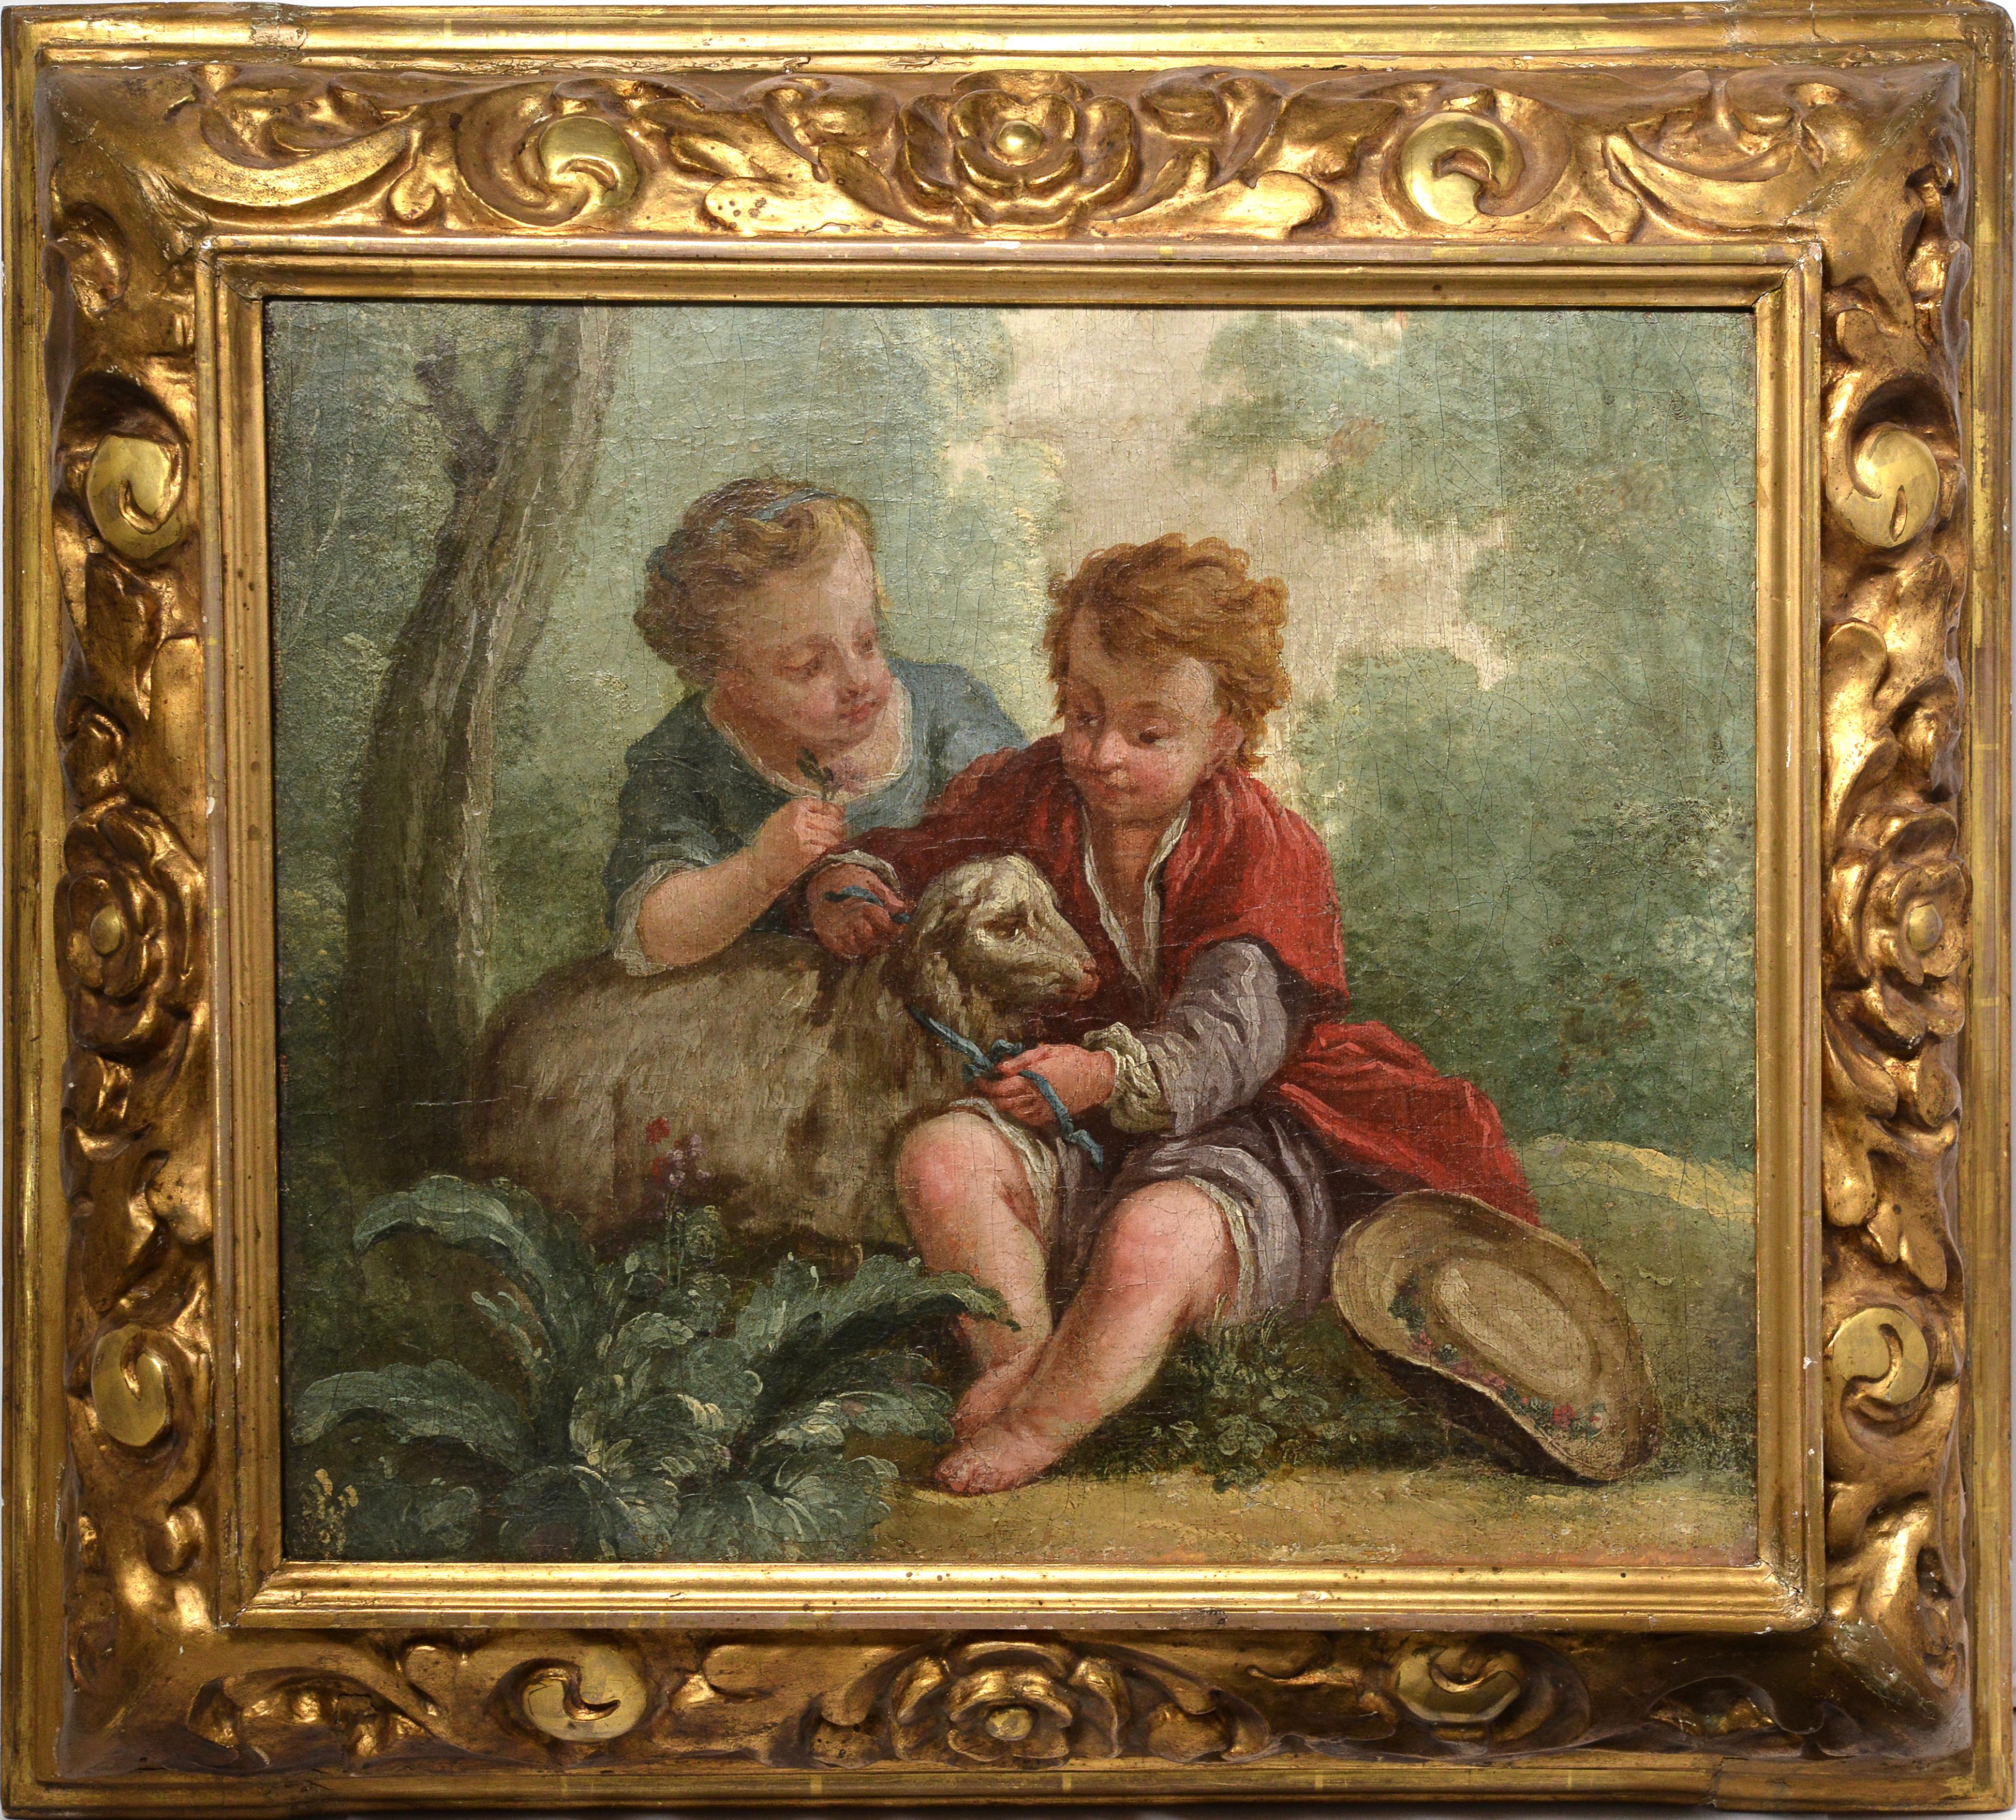 Children w Lamb Scene 18th century Oil painting by French Rococo Master